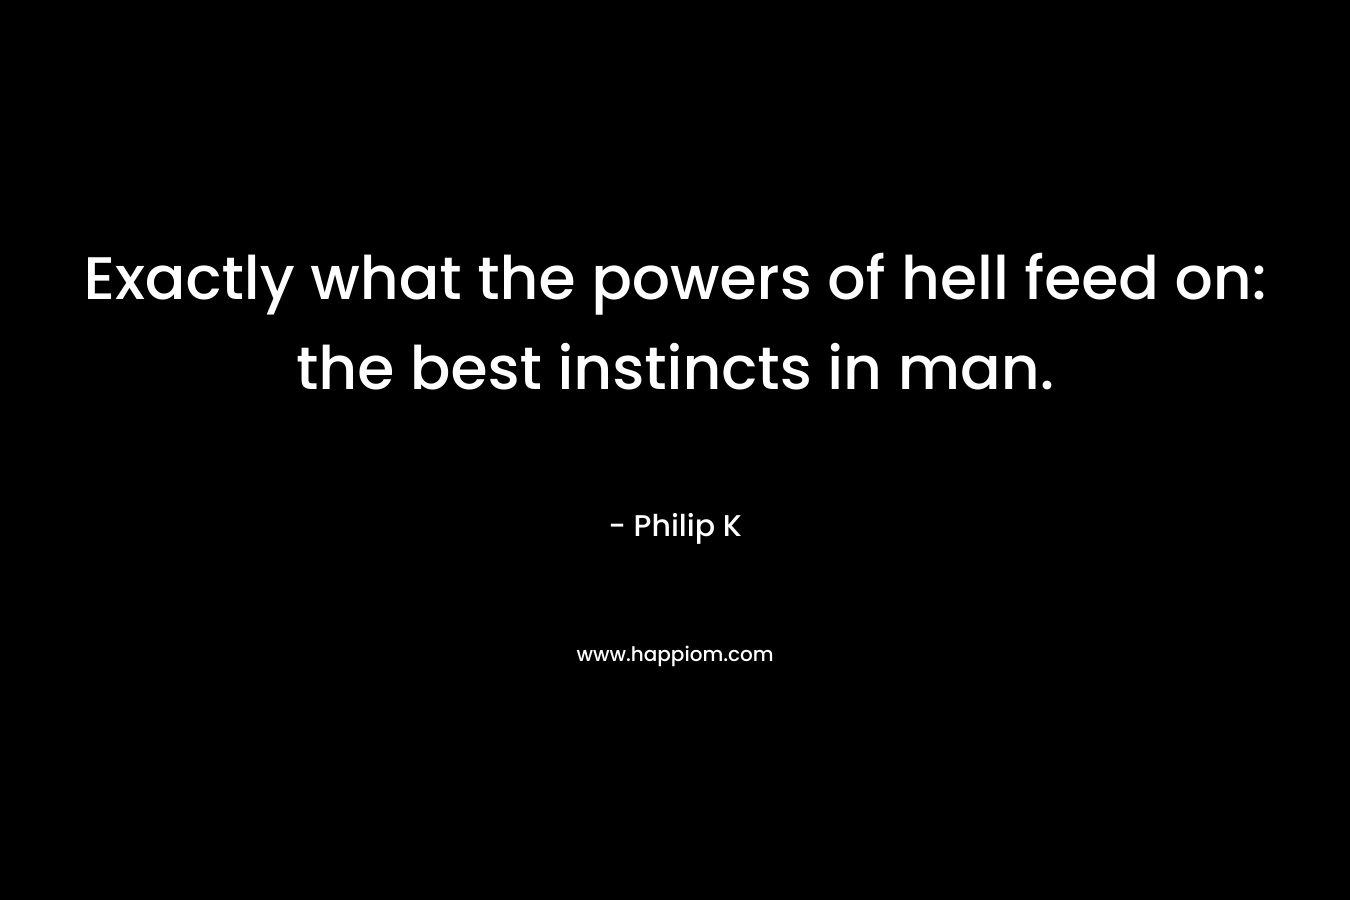 Exactly what the powers of hell feed on: the best instincts in man.